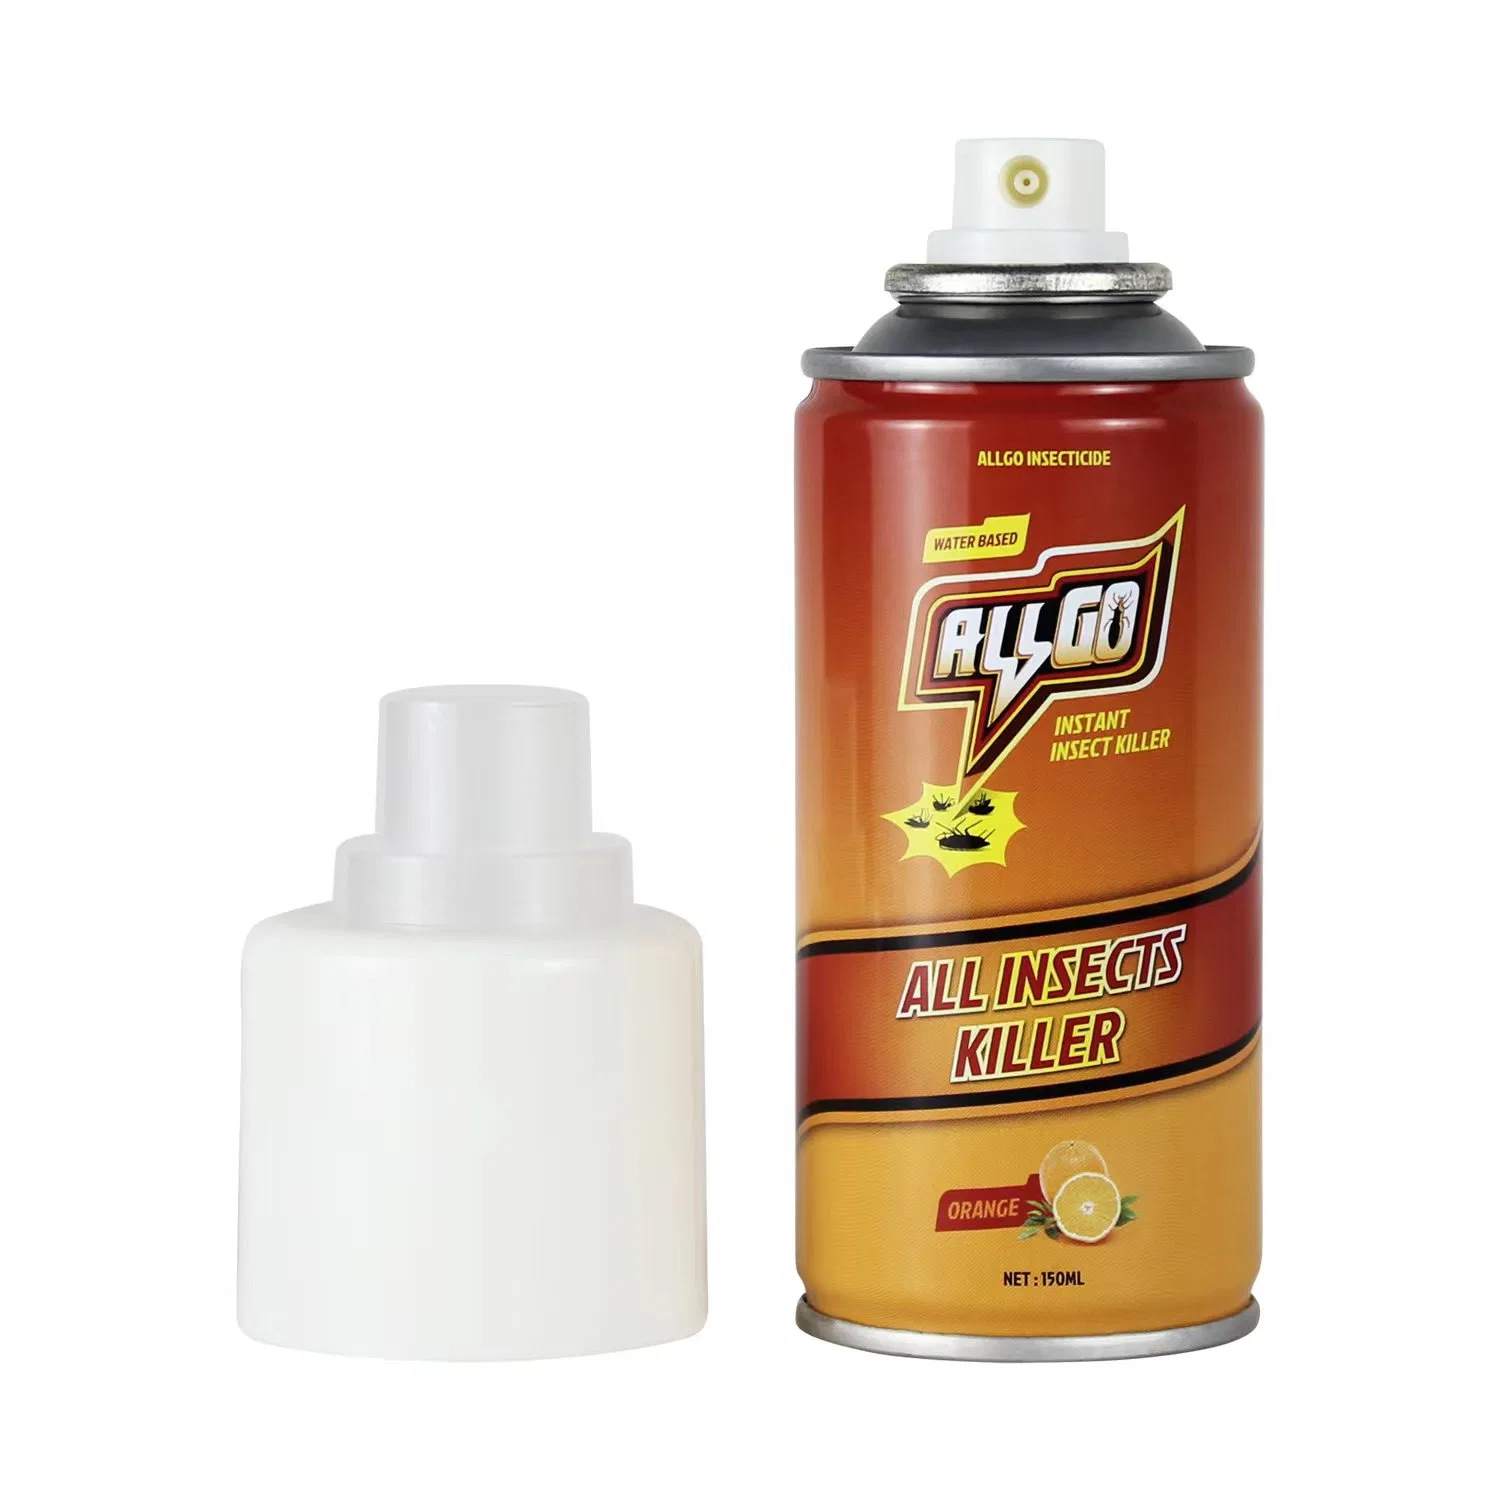 All Insect Killer Spray Aerosol Insect Killer Aerosols Insecticide Cockroach Killer